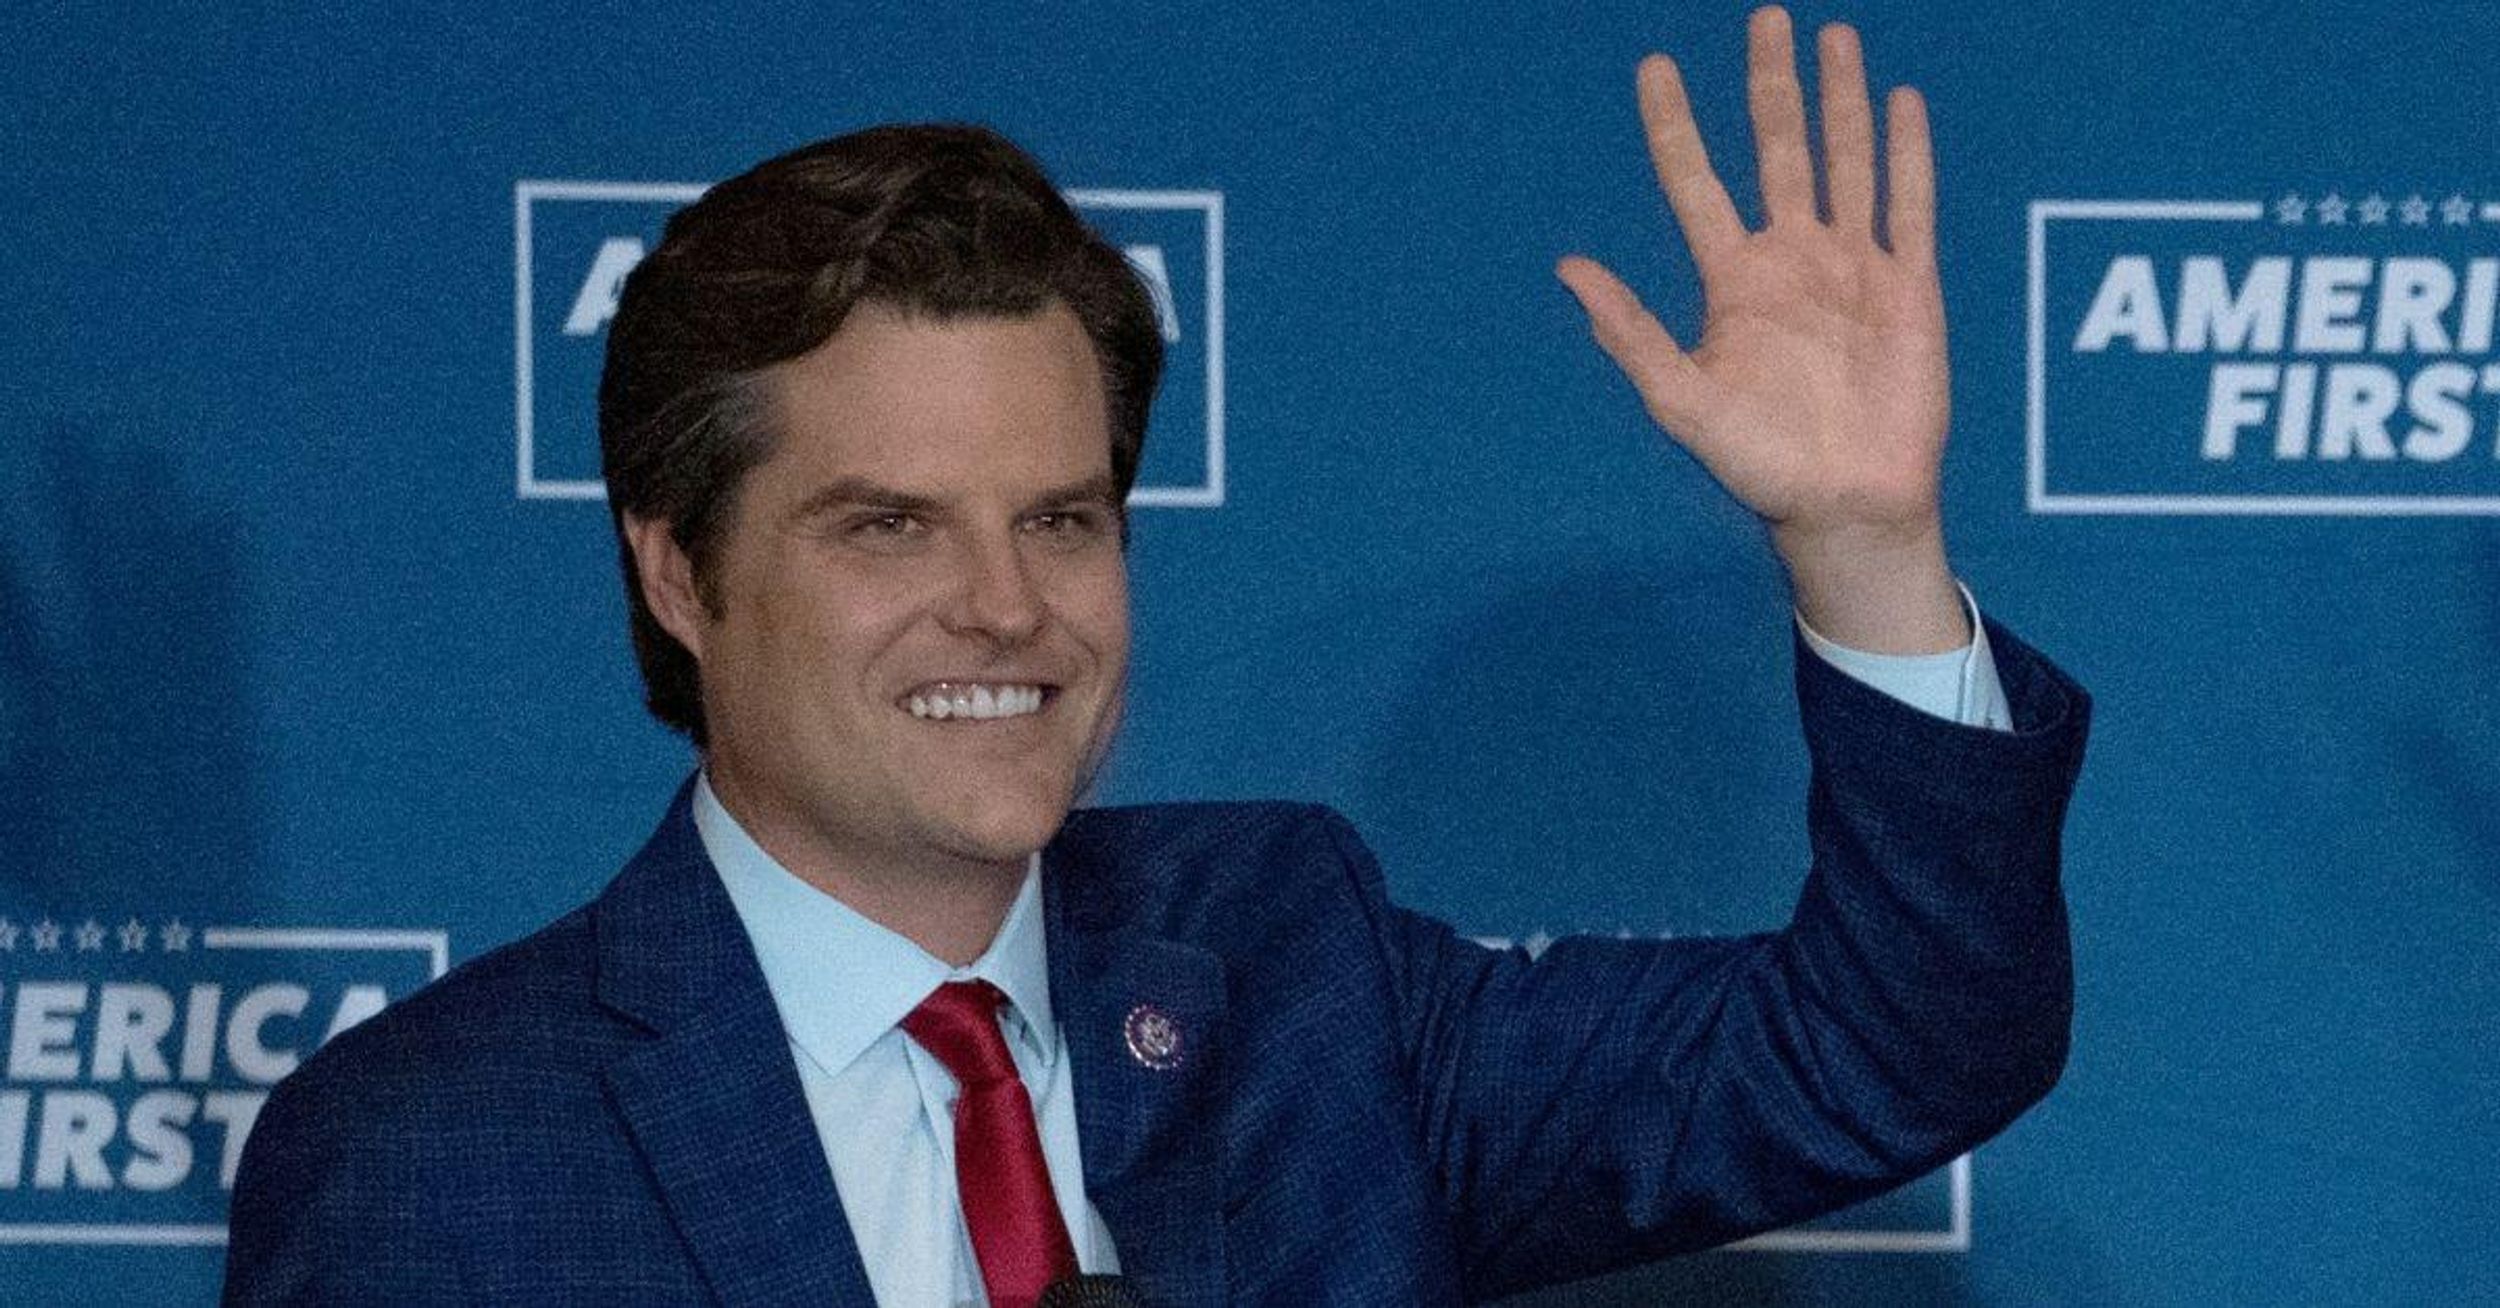 Matt Gaetz Says He'll Run For President In 2024 If Trump Doesn't—And Twitter Is Having A Field Day